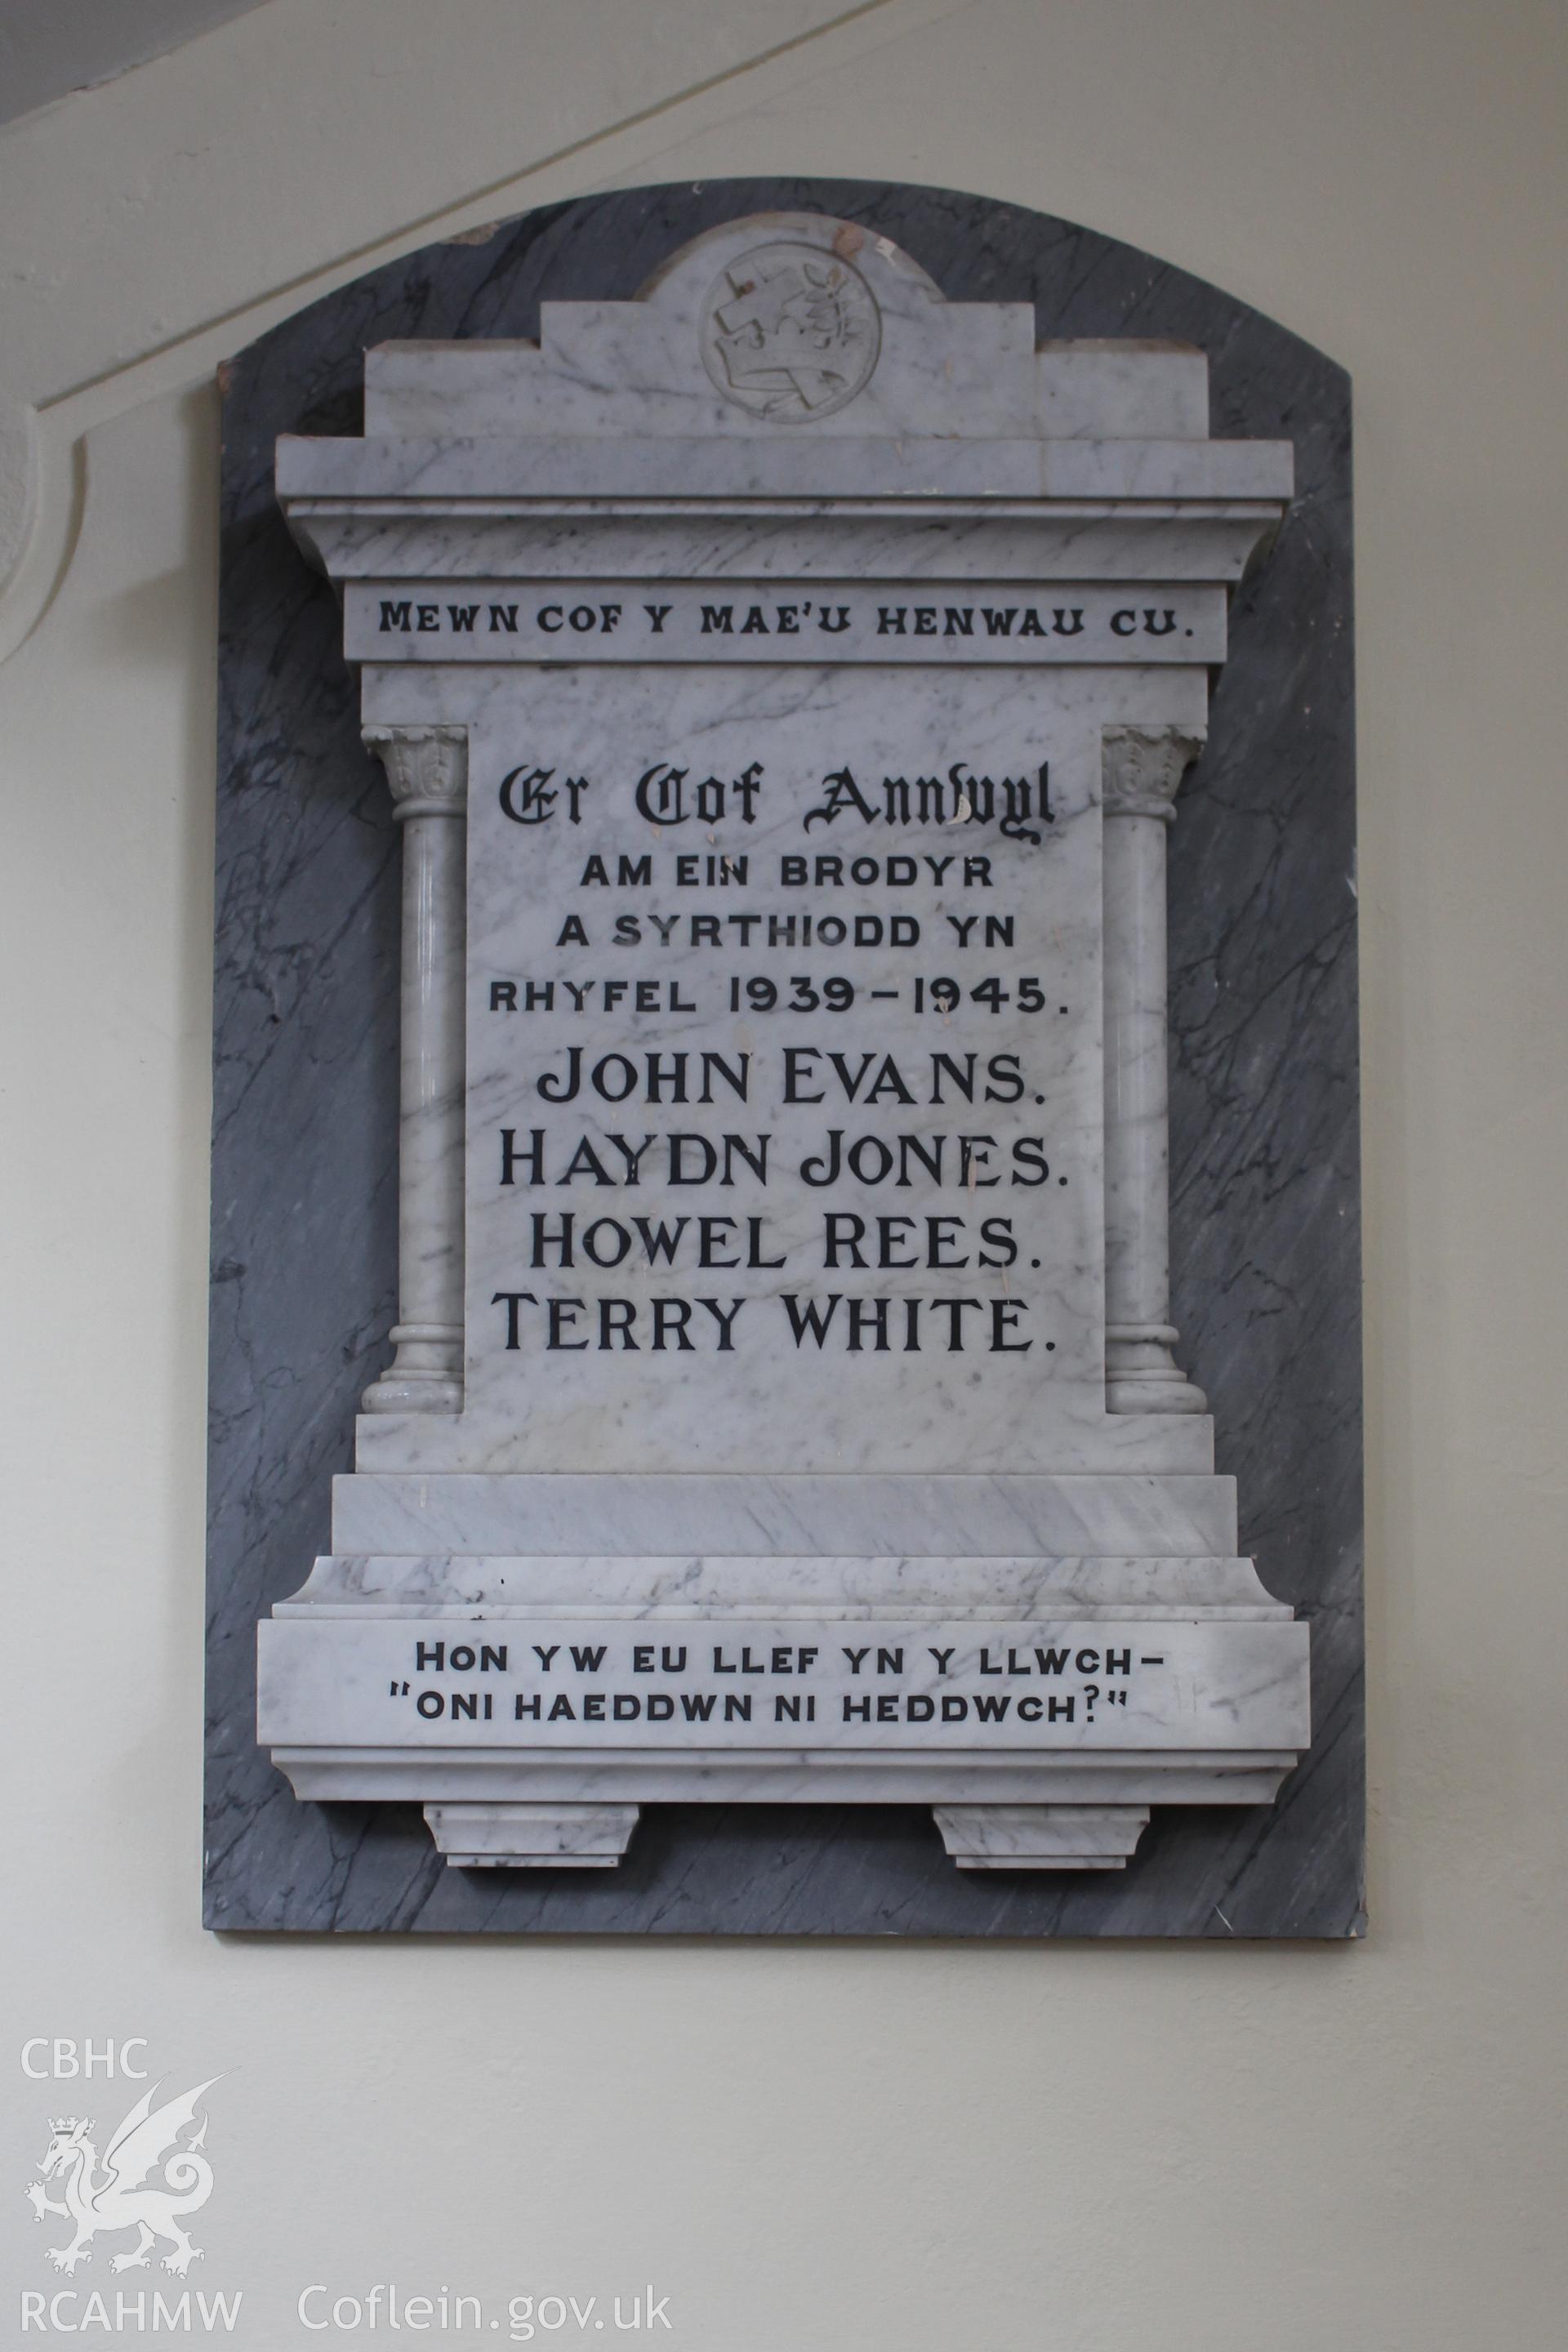 Colour photograph showing detail of memorial stone dedicated to members of Mynydd Bach Independent Chapel who died during the Second World War. Taken during photographic survey conducted by Sue Fielding on 13th May 2017.